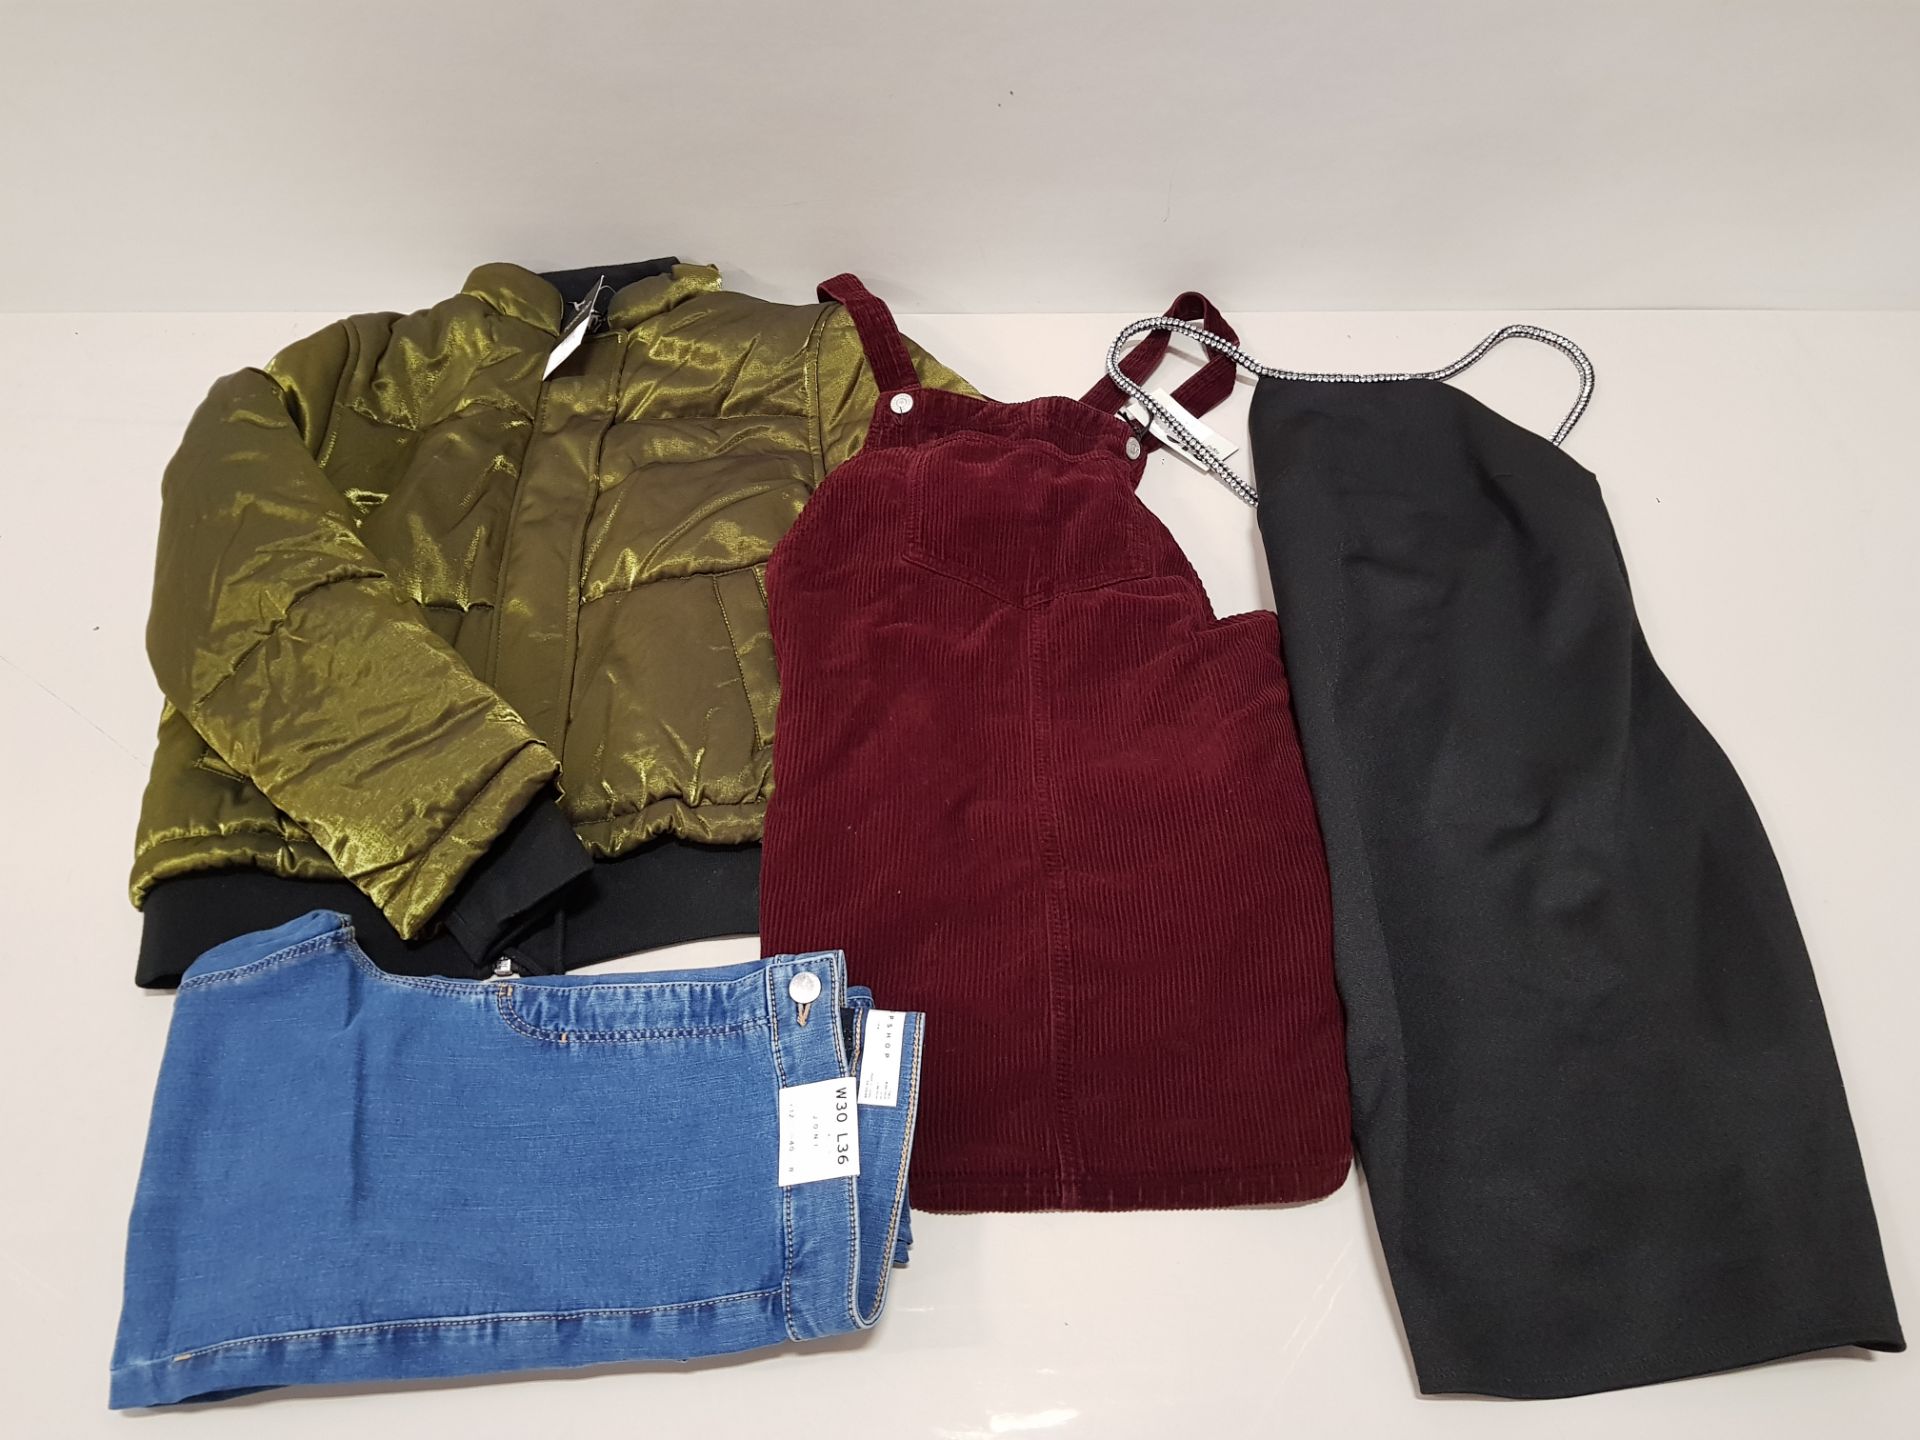 FULL PALLET OF TOPSHOP JEANS, JACKETS, F&F JEANS AND OTHER BRANDS OF CLOTHING